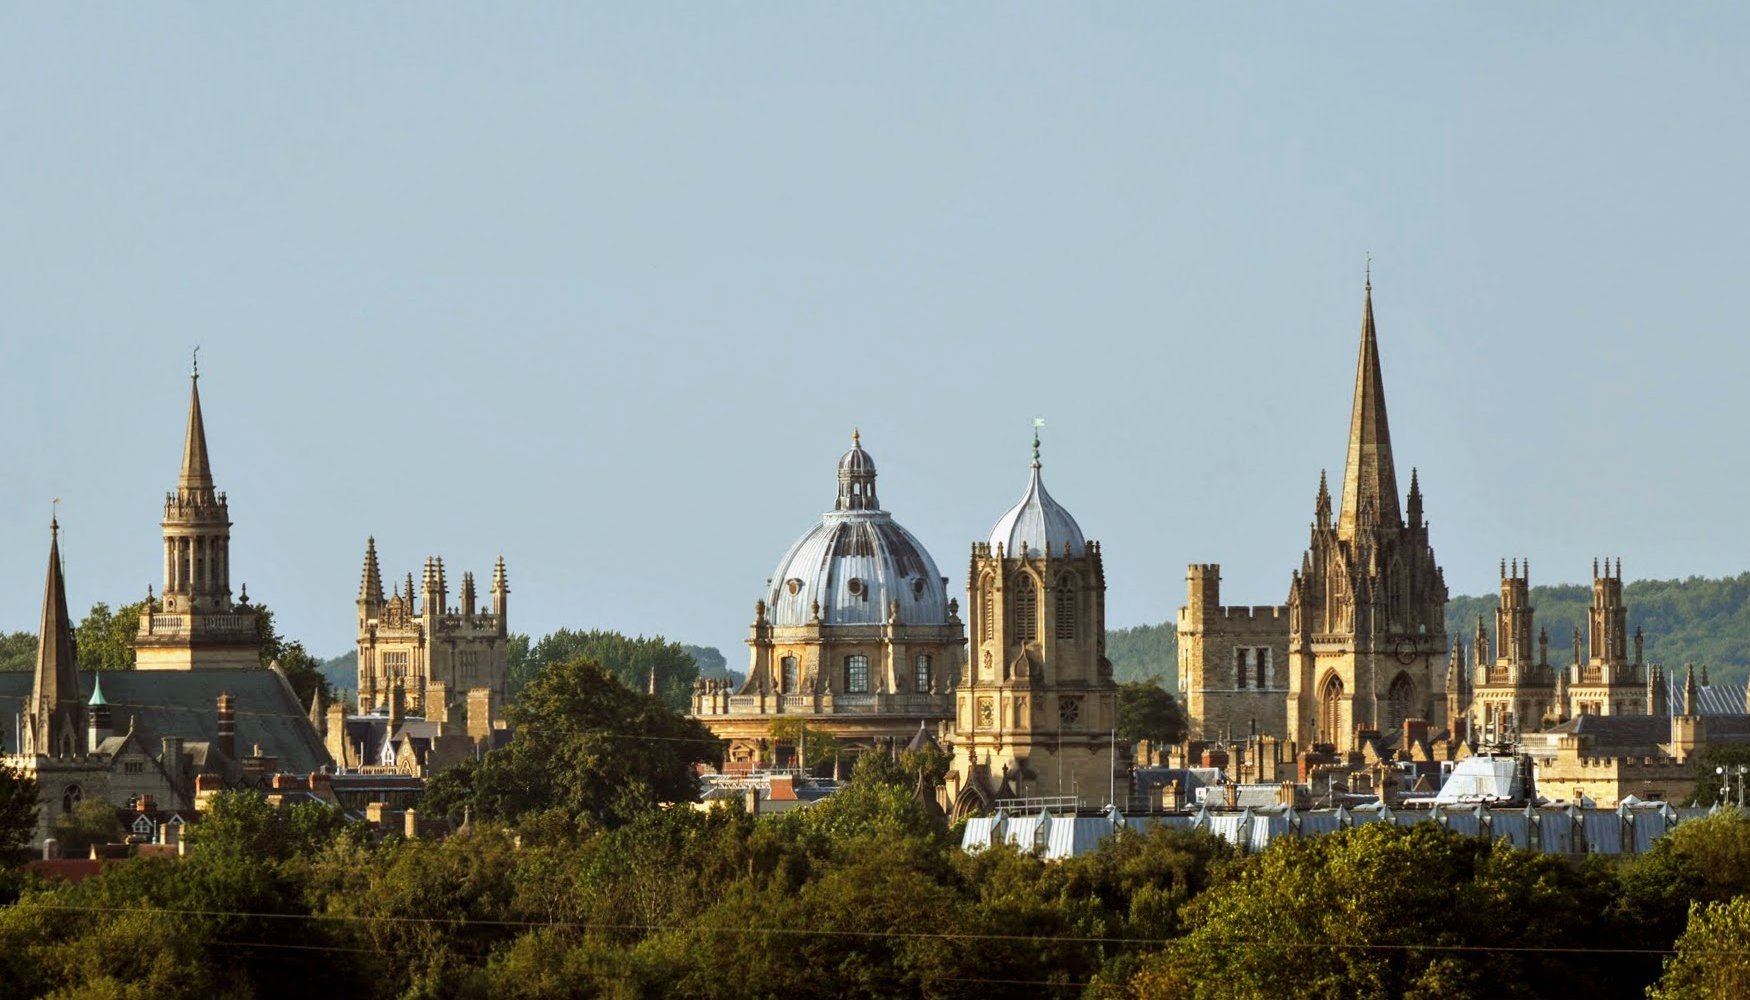 Oxford, City of Dreaming Spires